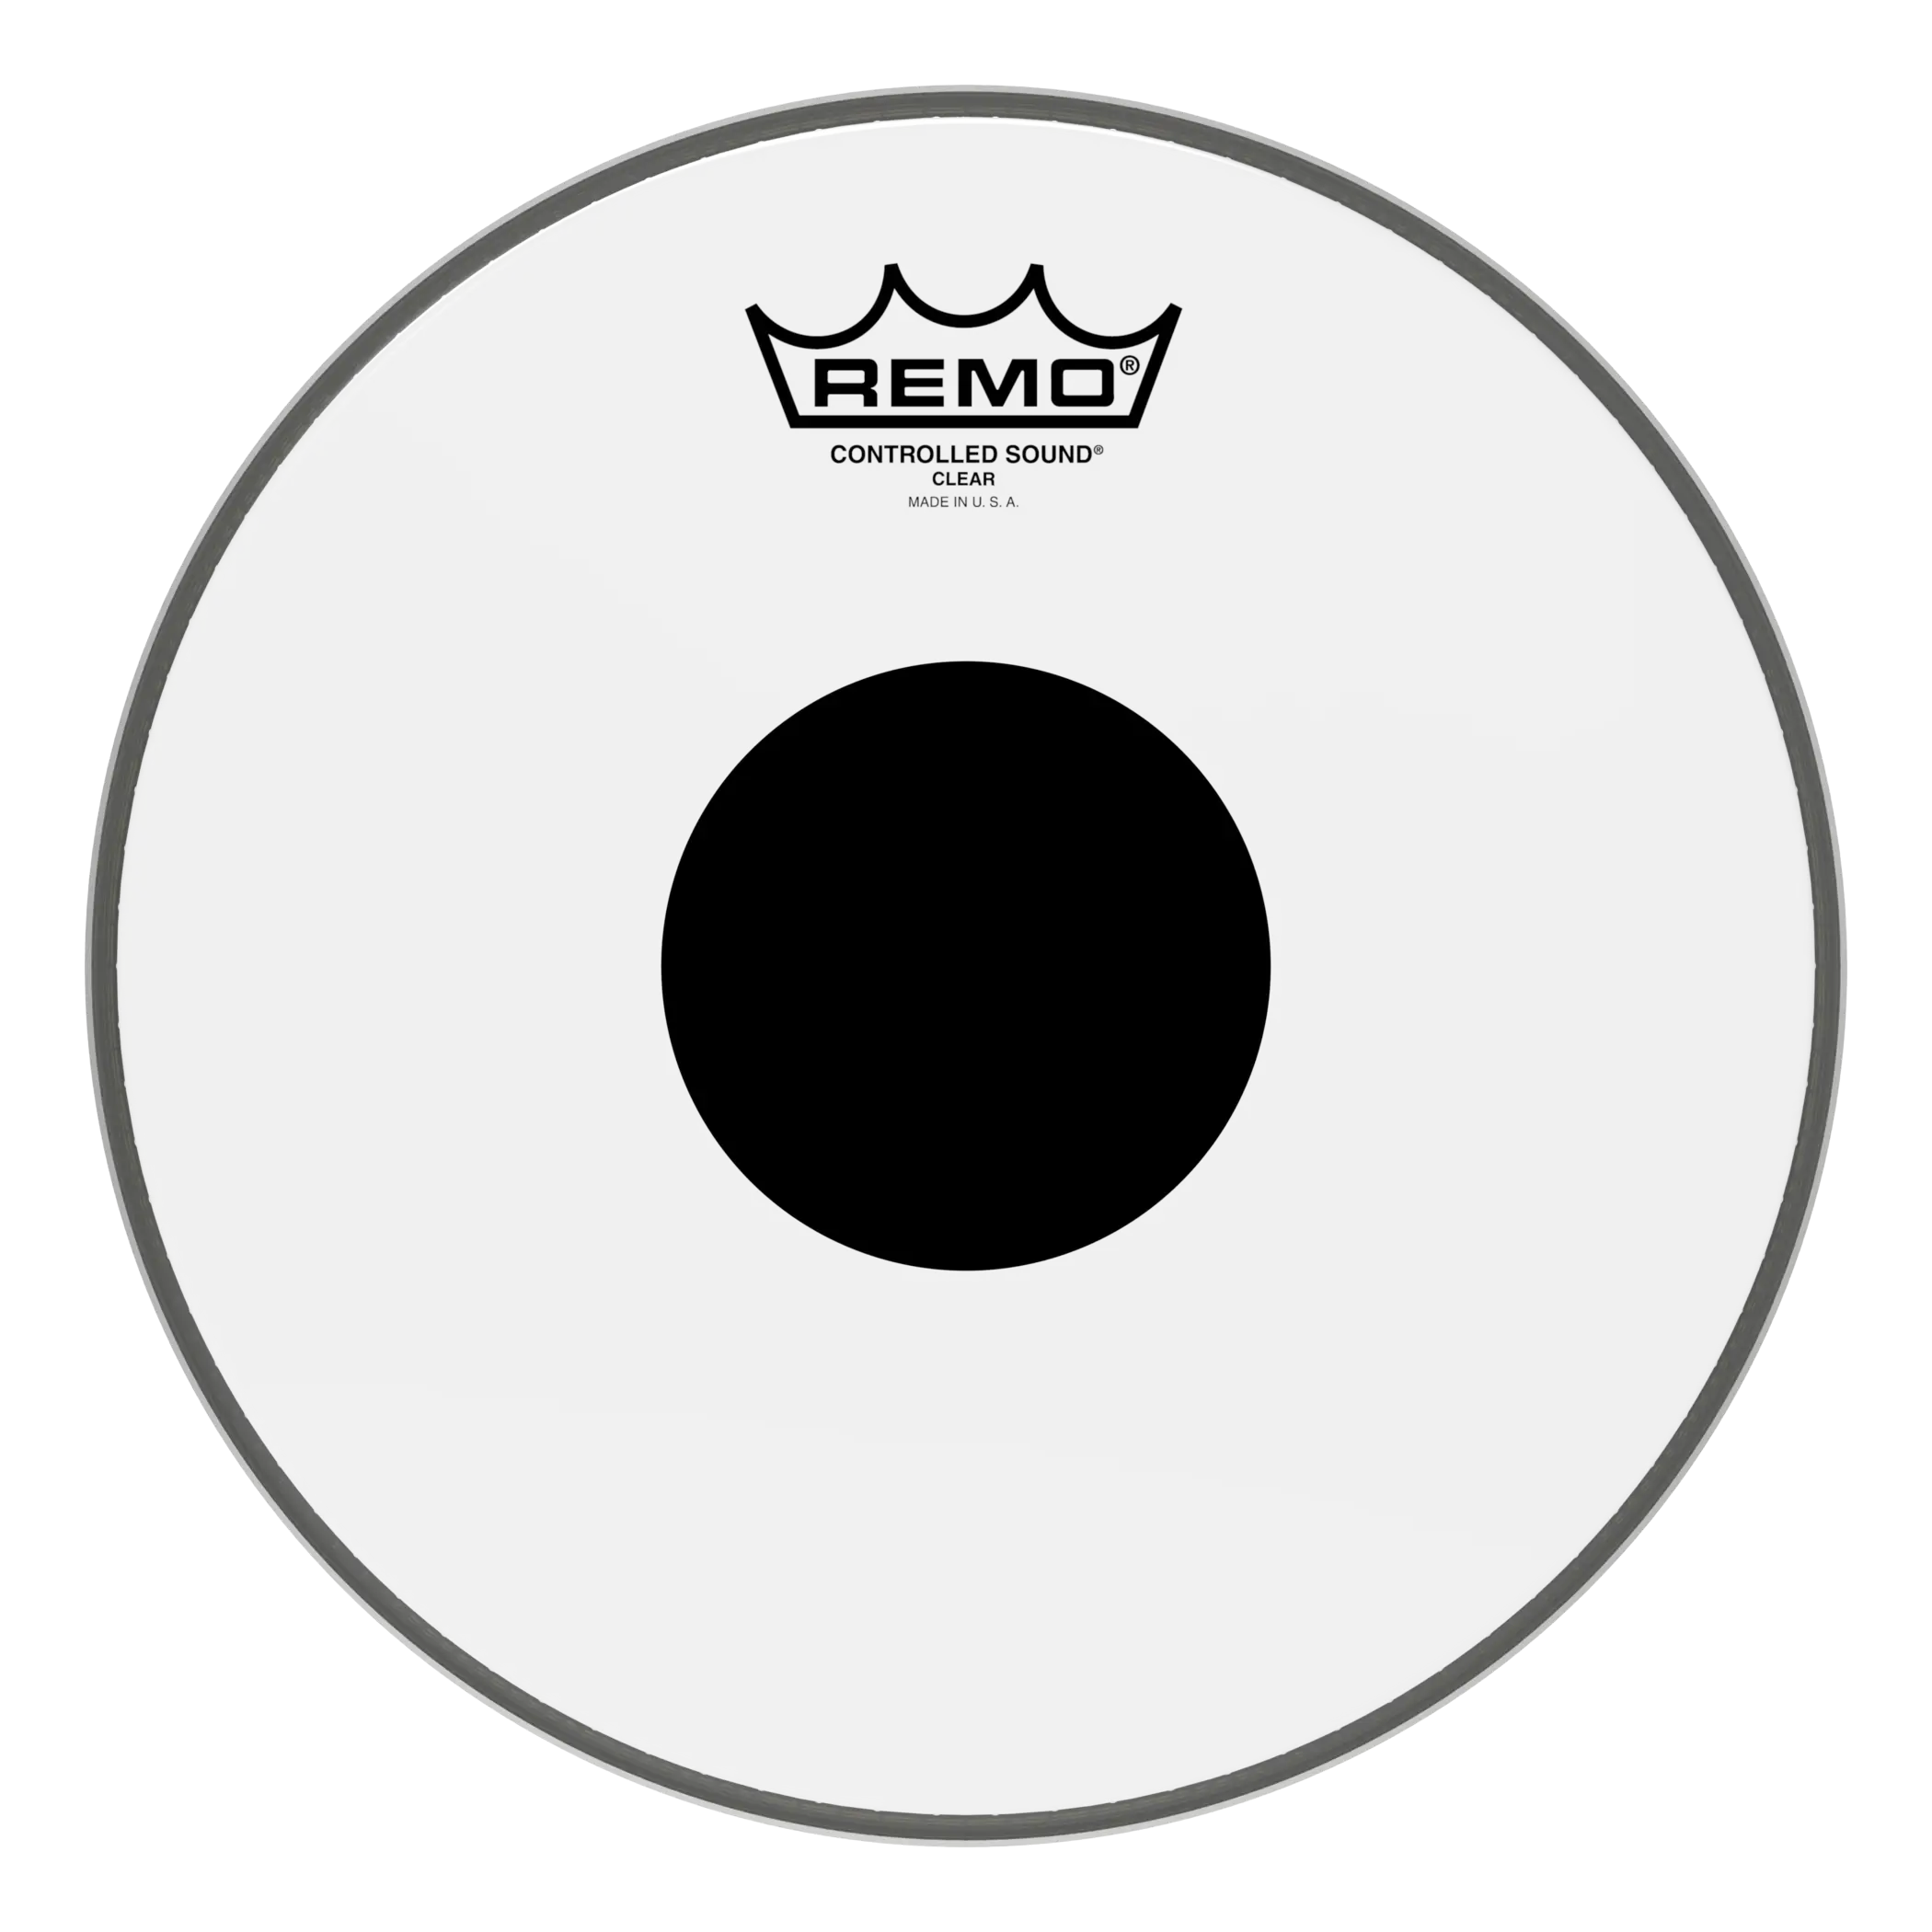 Remo 10" Controlled Sound Clear Black Dot Drumhead